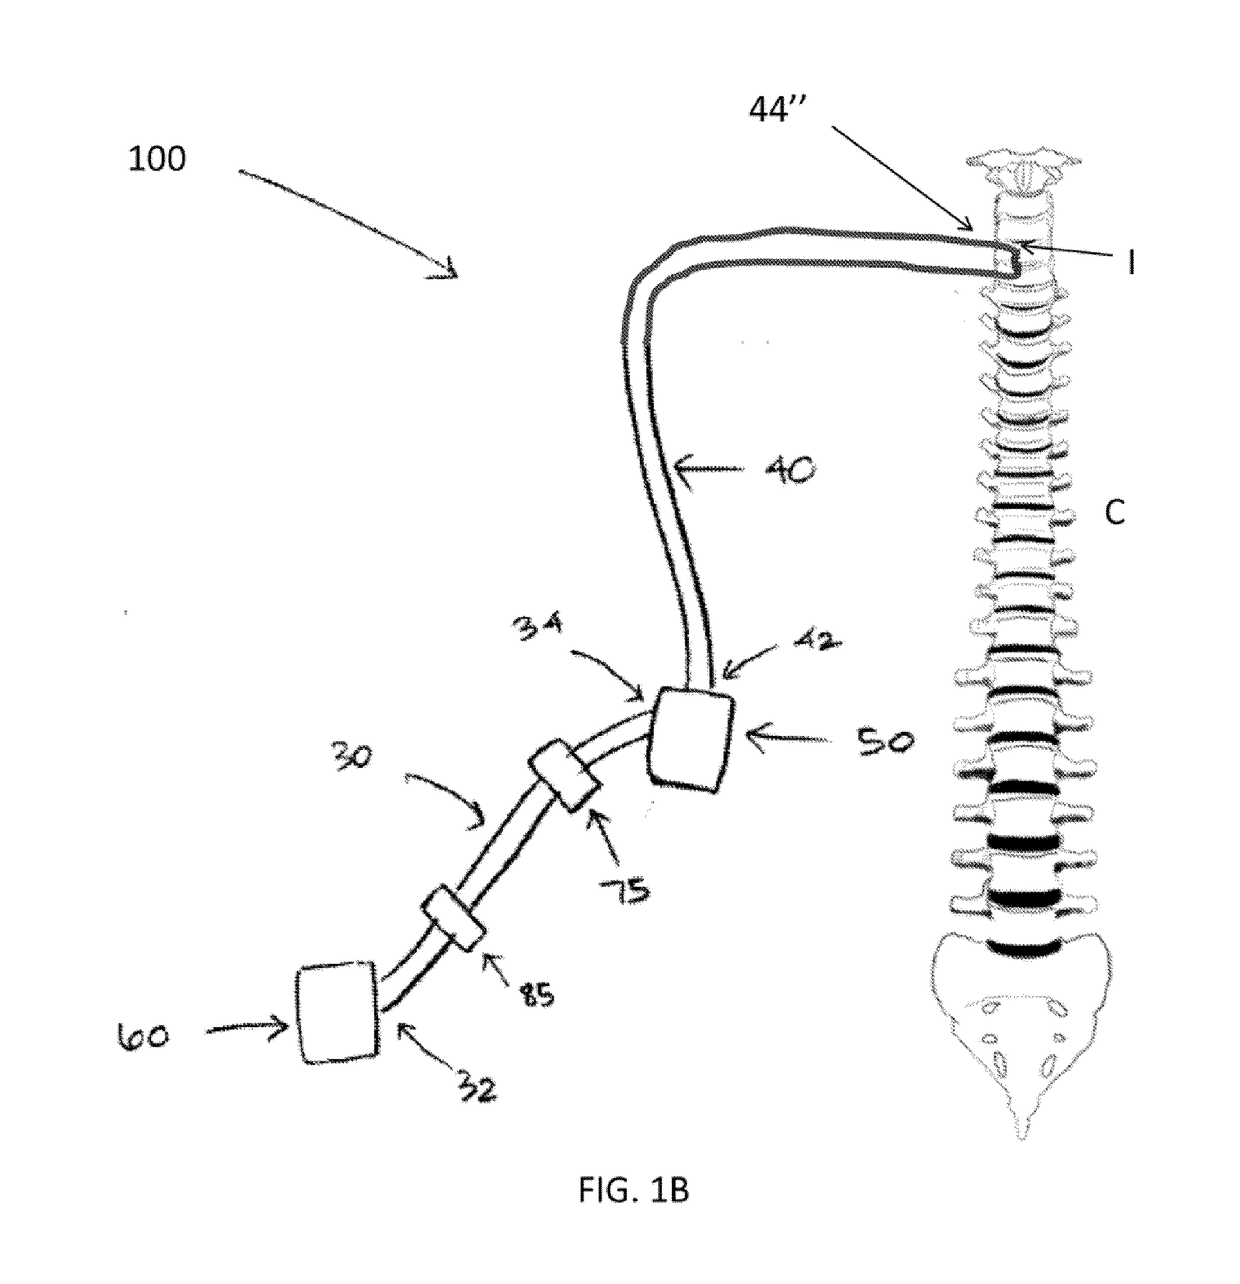 Therapeutic applications of artificial cerebrospinal fluid and tools provided therefor